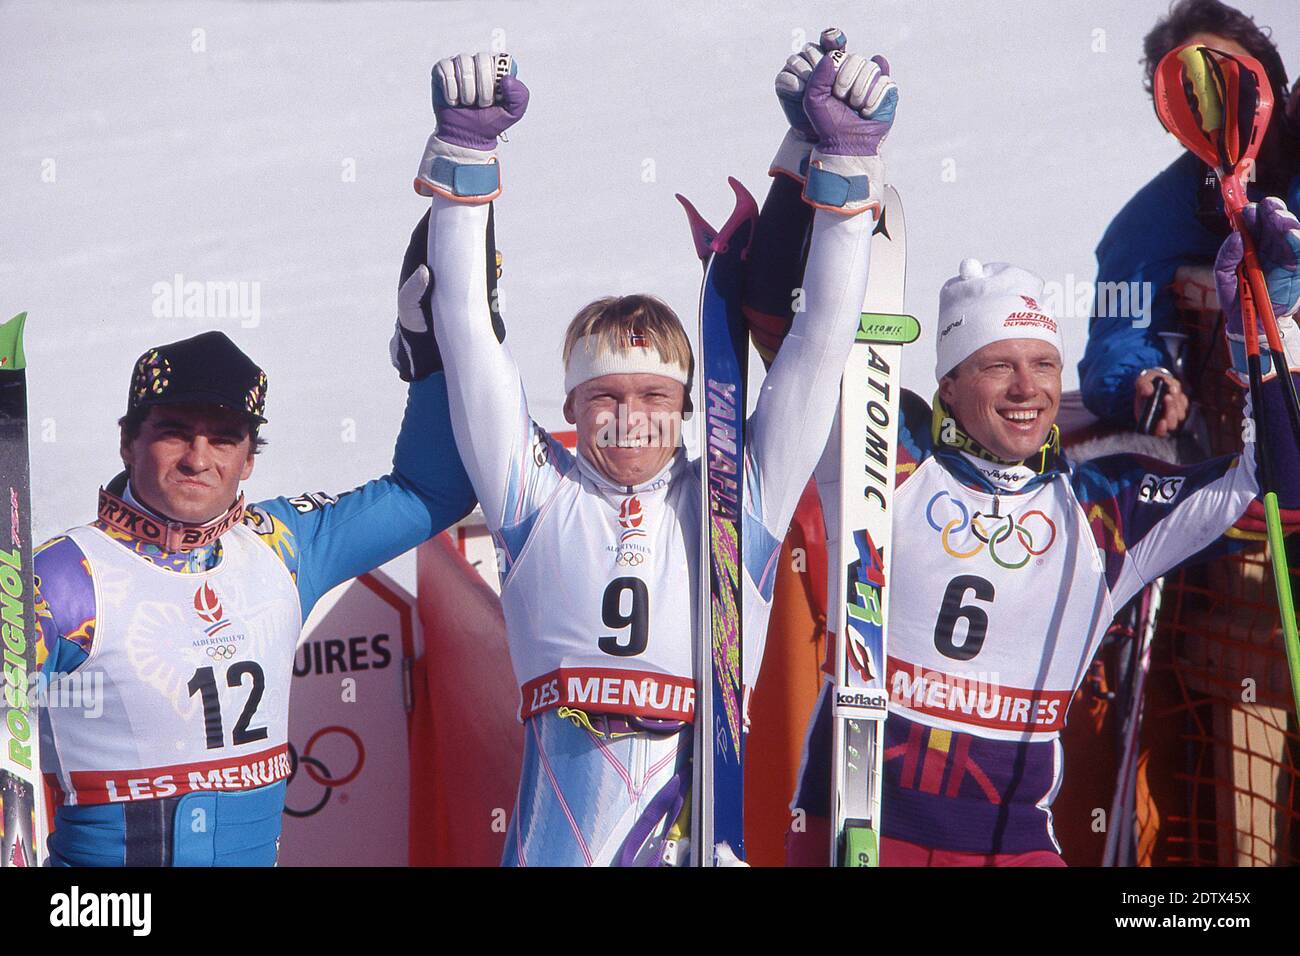 Finn Christian Jagge Nor Wed Alpine Skiing Slalom Special Slalom Action Winner Gold Medal Gold Medalist Olympic Champion Cheers With Alberto Tomba Ita Left Runner Up And Michael Tritscher Aut Special Slalom Men On